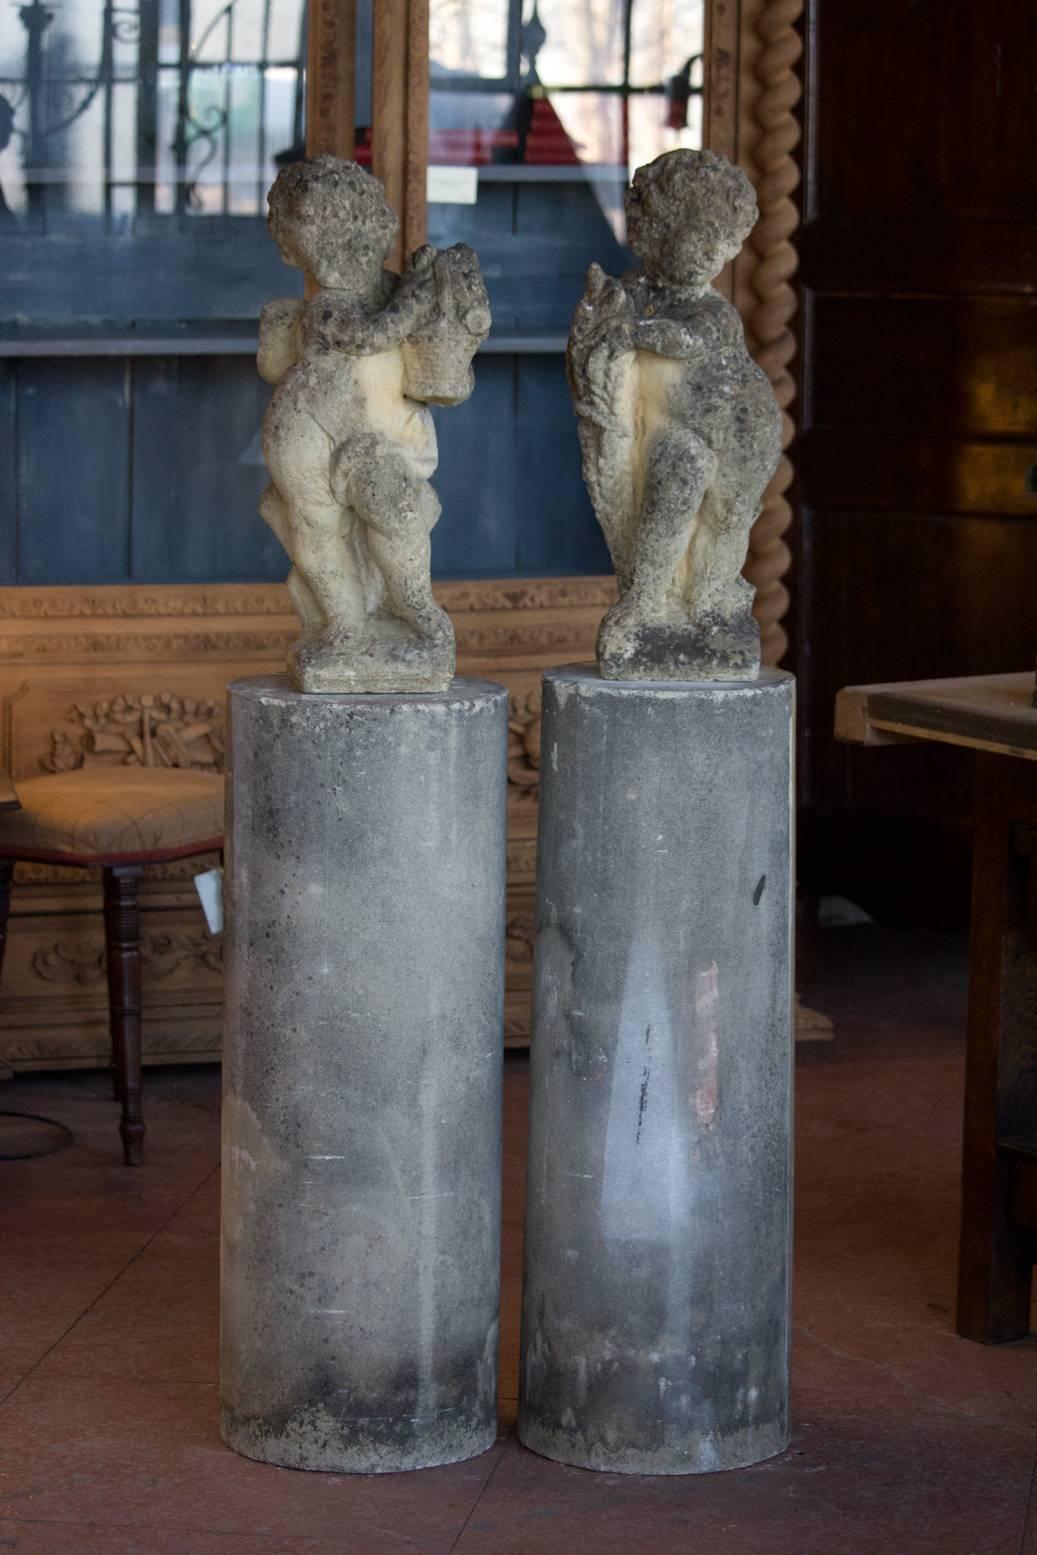 Pair of vintage cast stone putti on tall columns. One representing summer and the other fall.

Beautiful patina and a wonderful addition to a country garden!